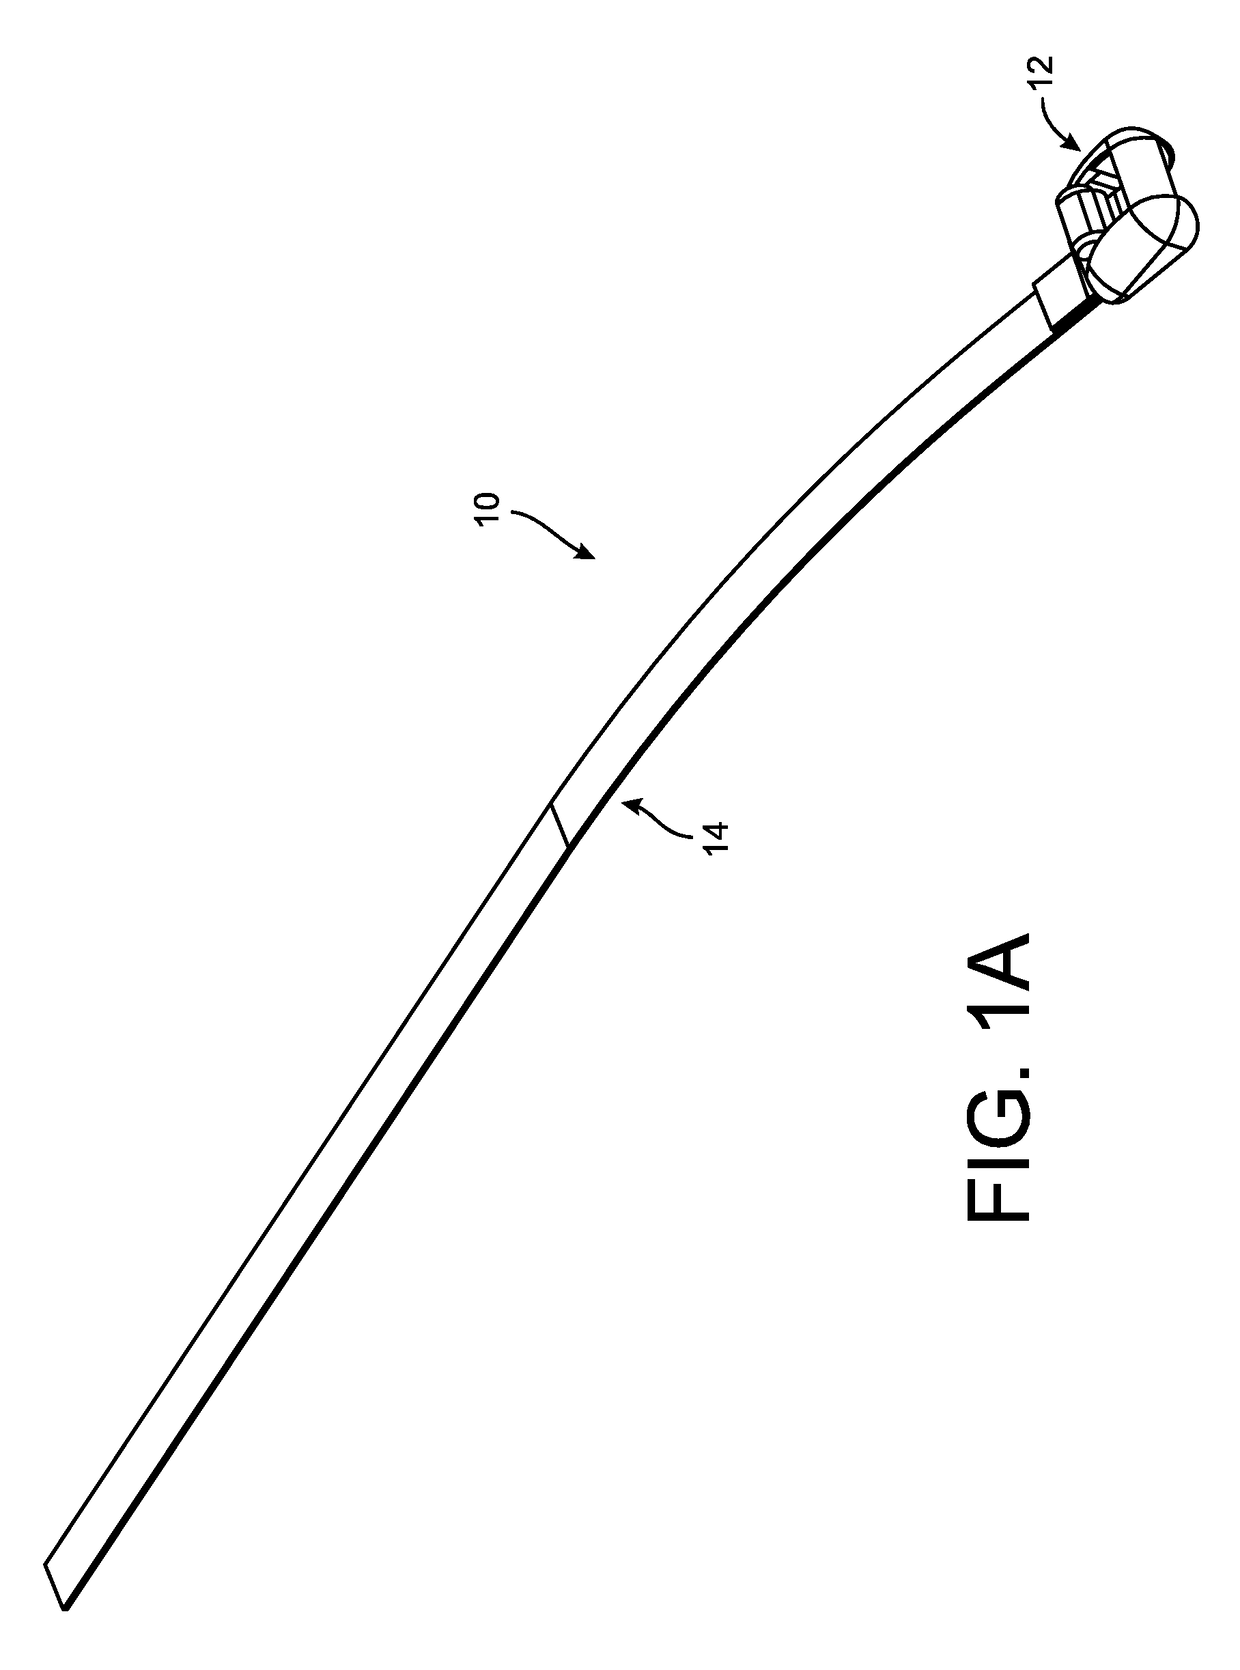 Cable lacing tie devices and methods of using the same